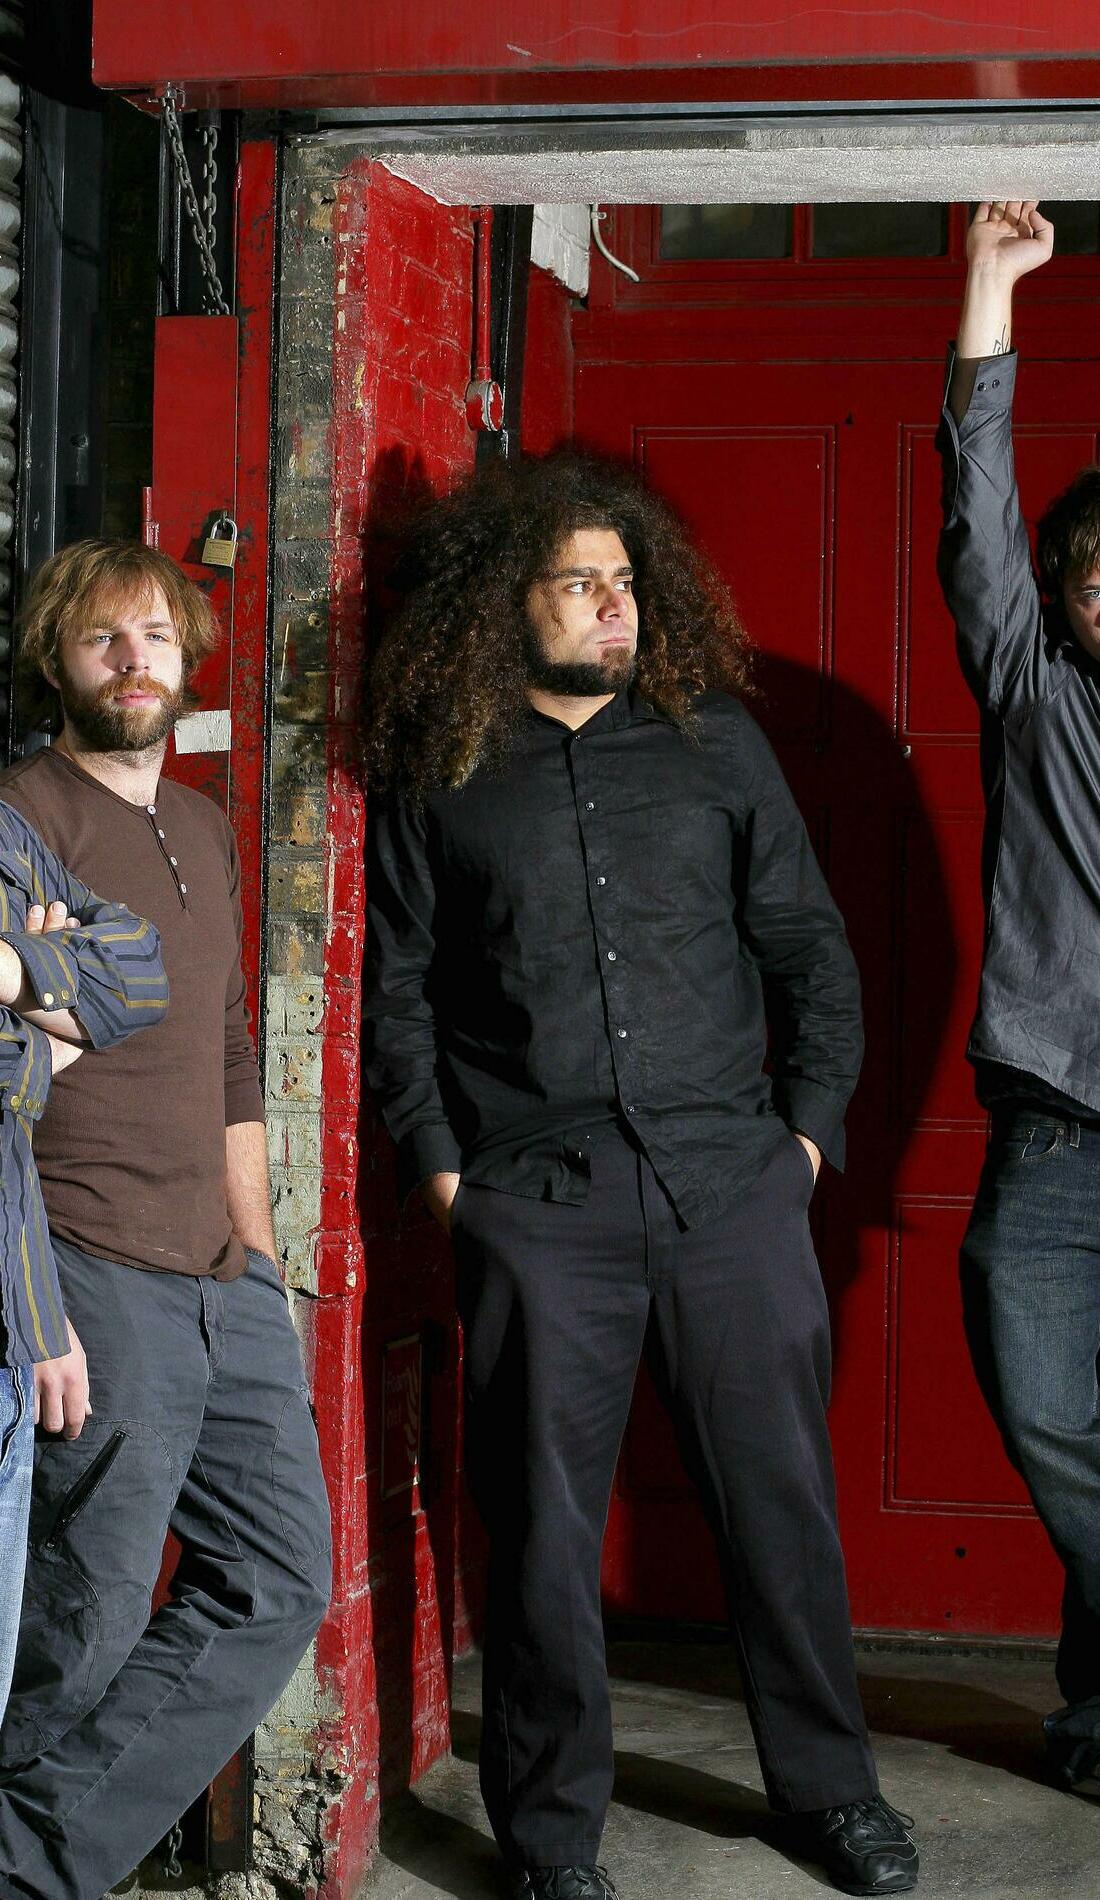 A Coheed and Cambria live event